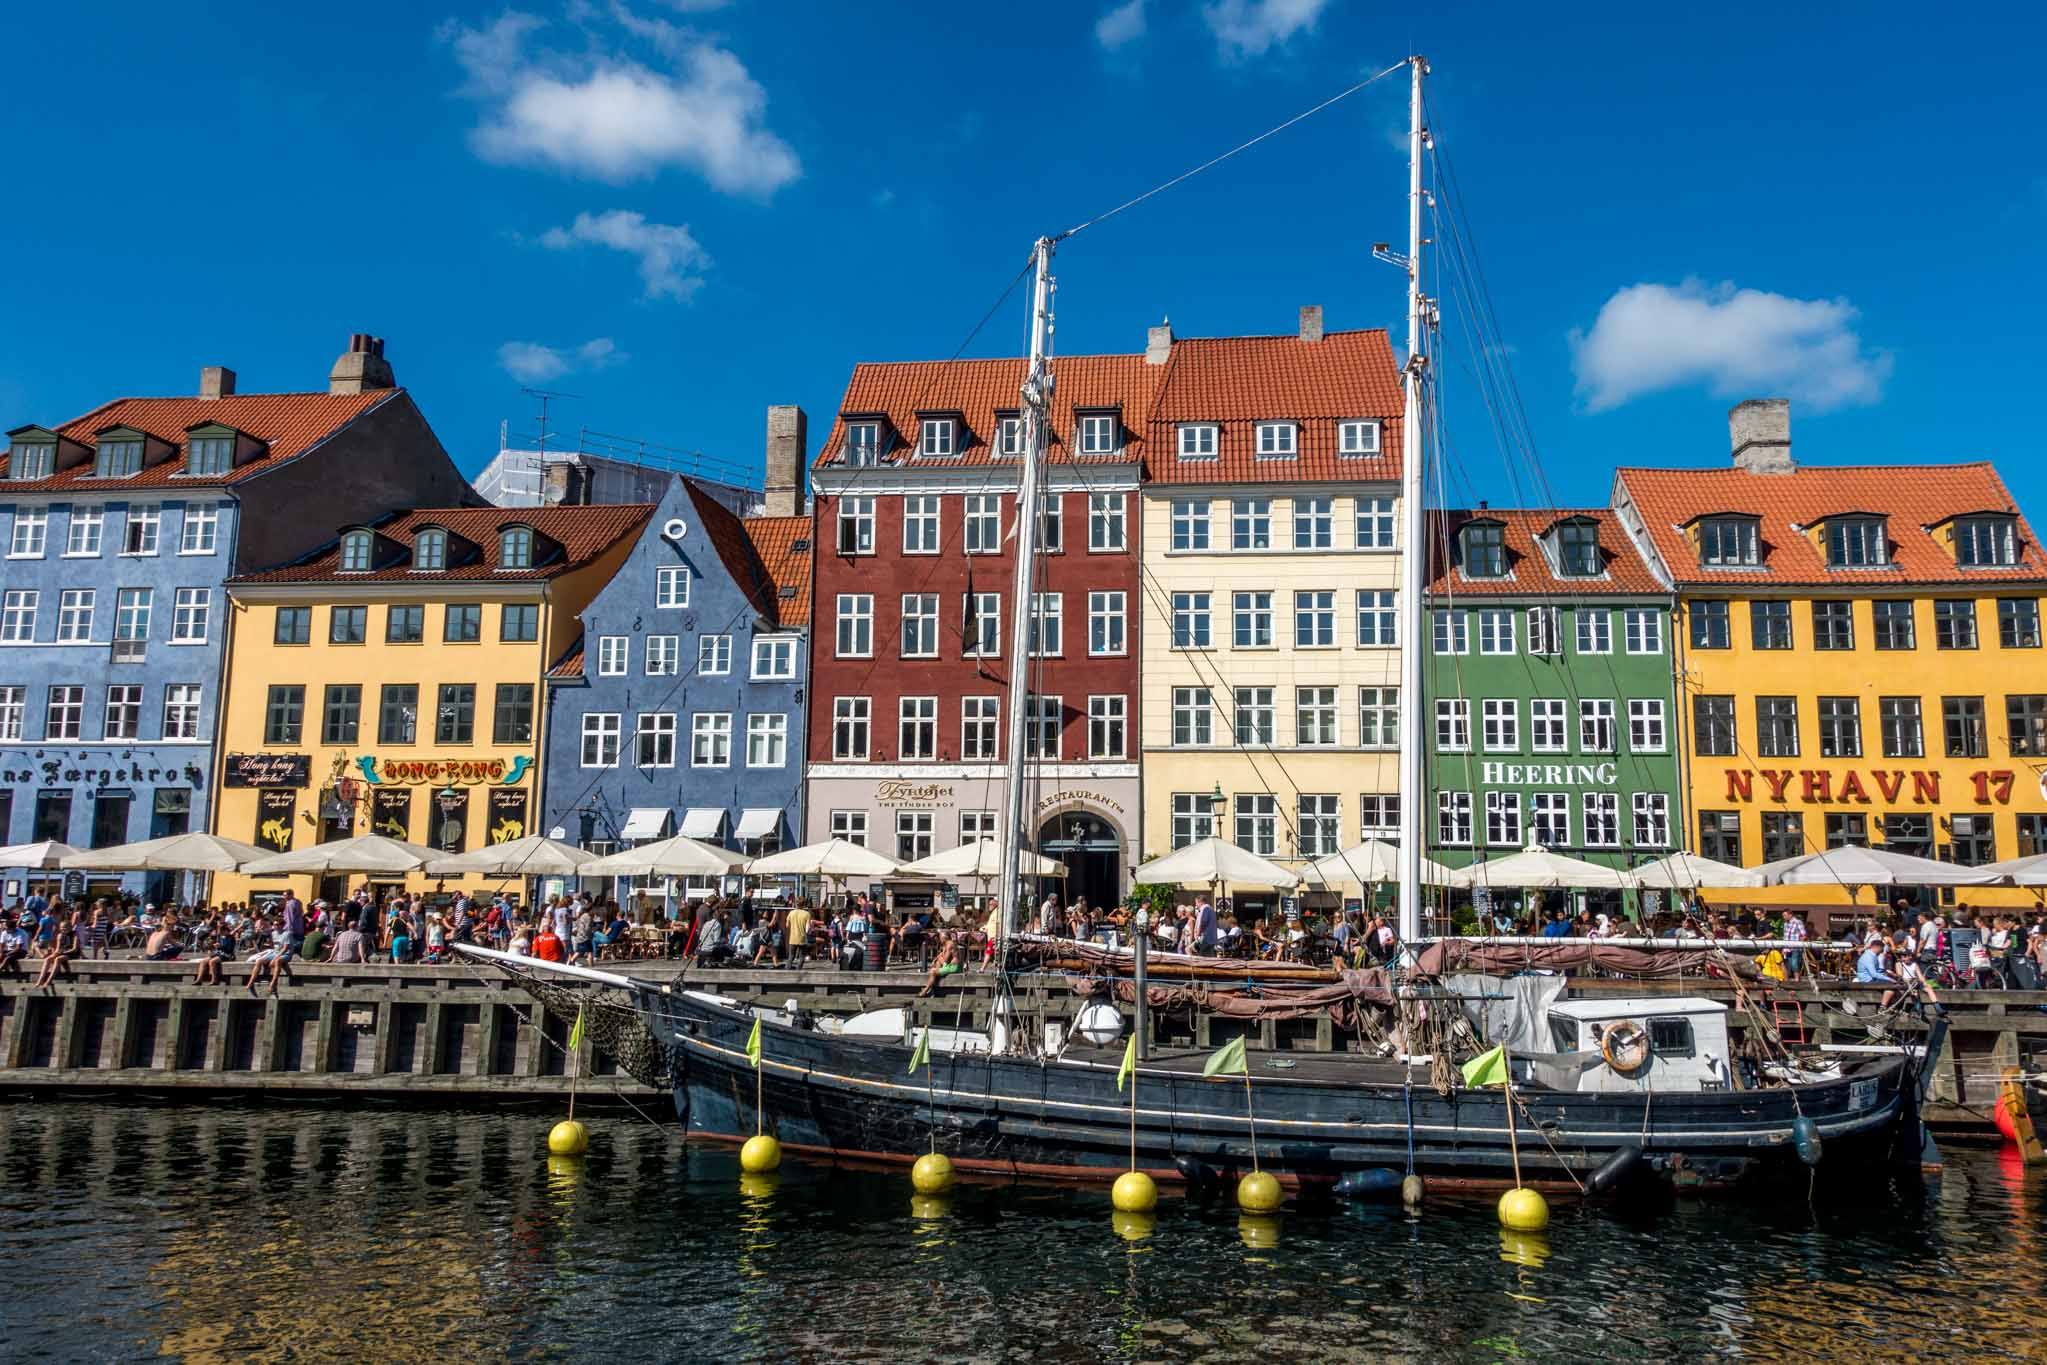 Nyhavn is the perfect place in Copenhagen to enjoy a sunny day